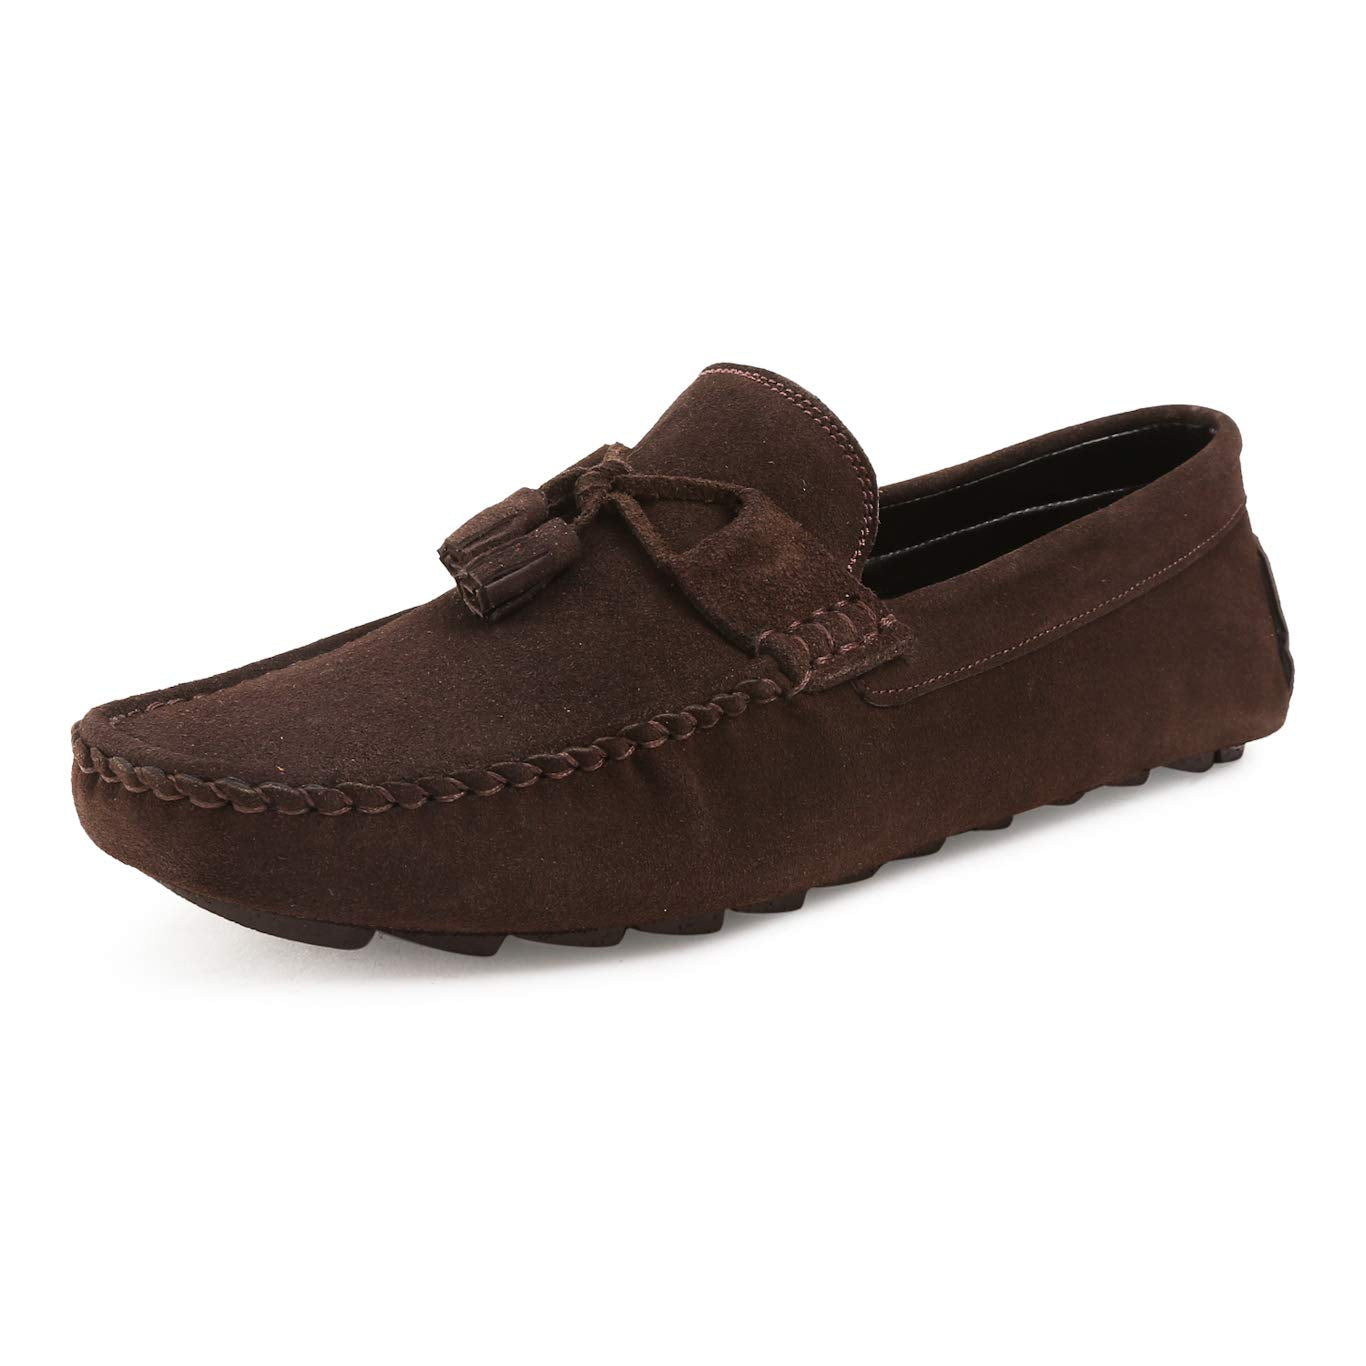 LOUIS STITCH Men's Brunette Brown Italian Leather Suede Loafer Tassel Penny Casual Loafers for Men (ITSUTABB-) (Size- 10 UK)